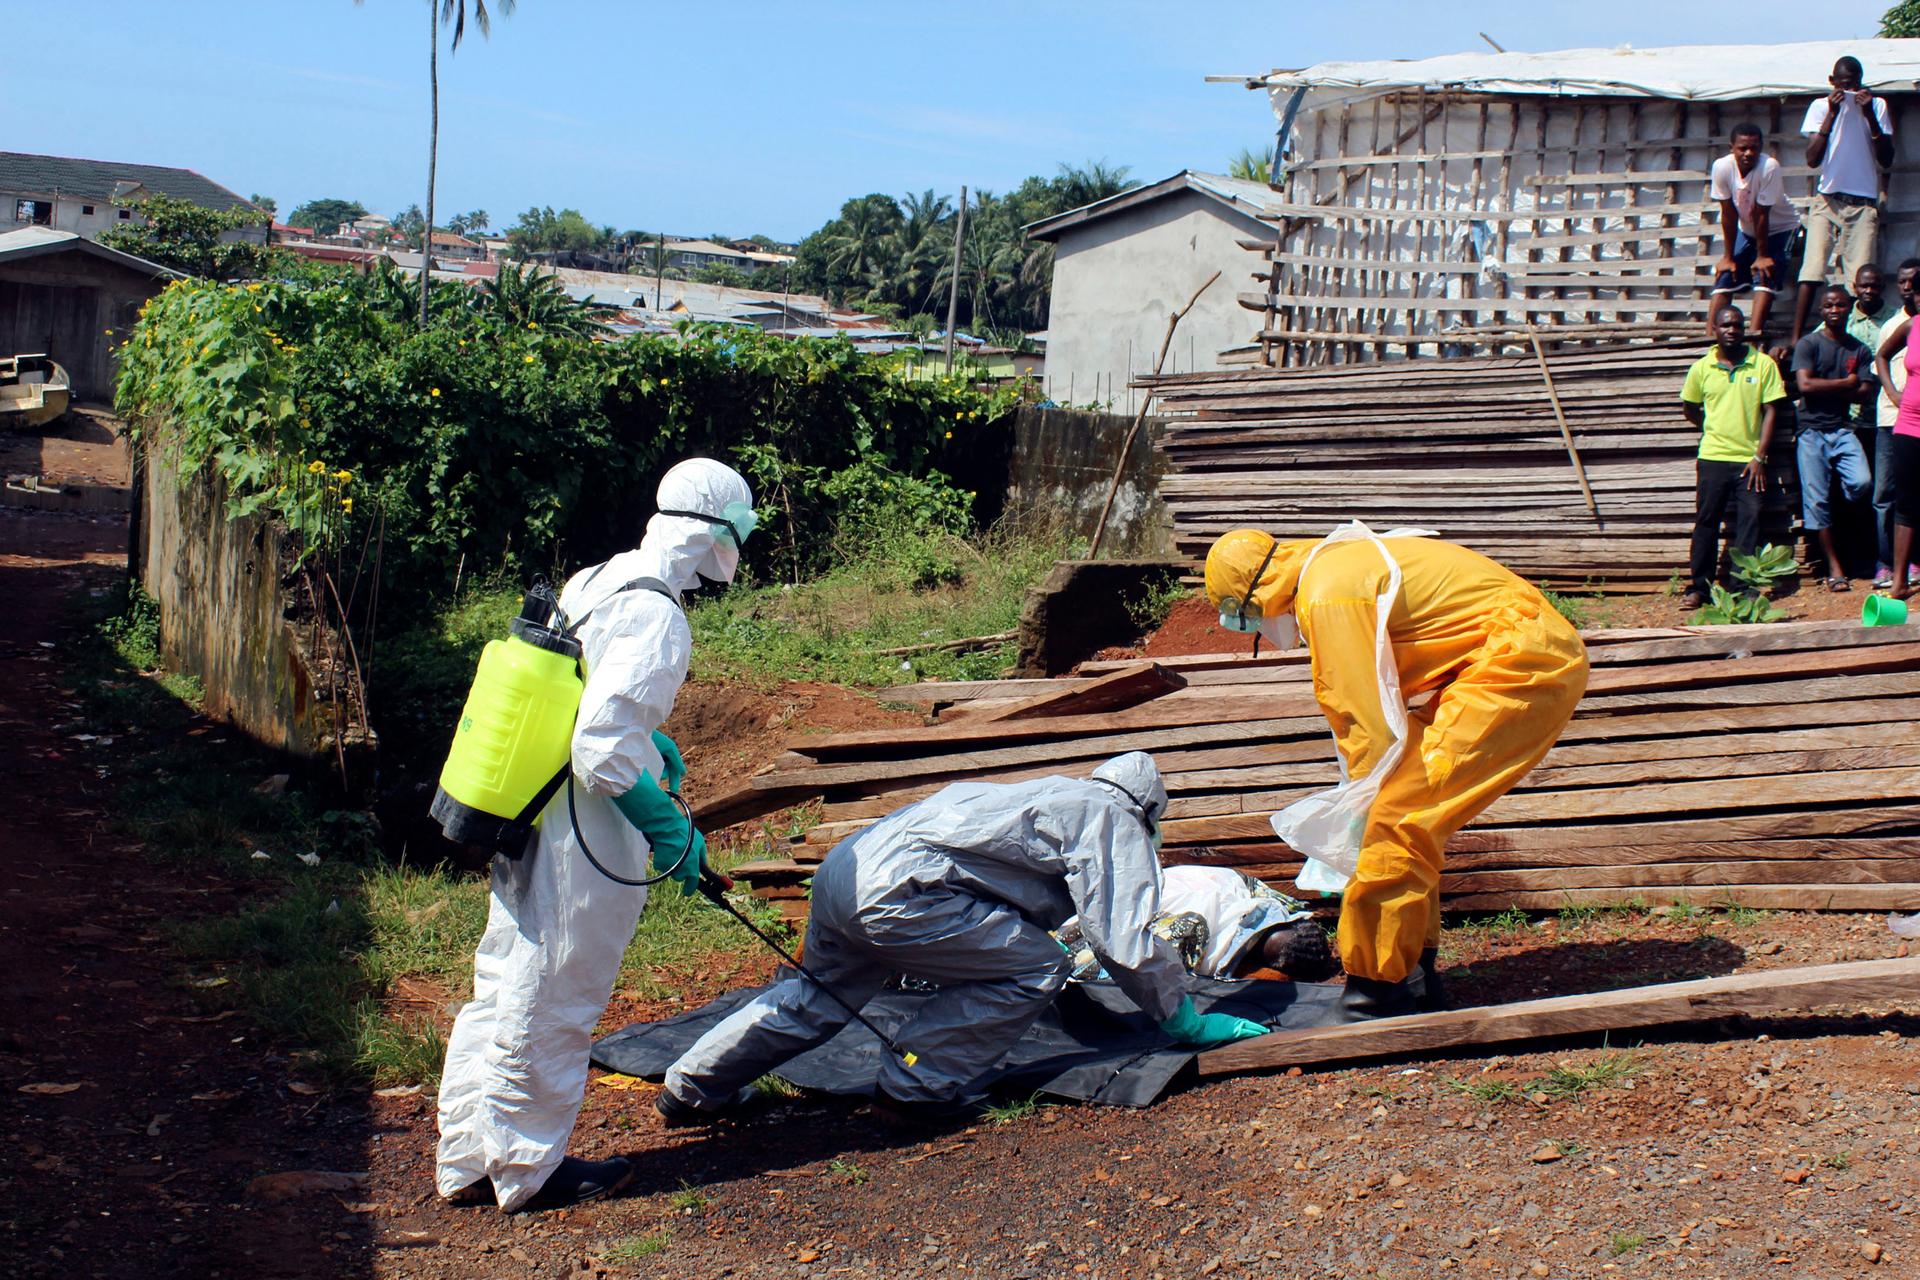 Health workers remove the body a woman who died from the Ebola virus in the Aberdeen district of Freetown, Sierra Leone, on October 14, 2014.